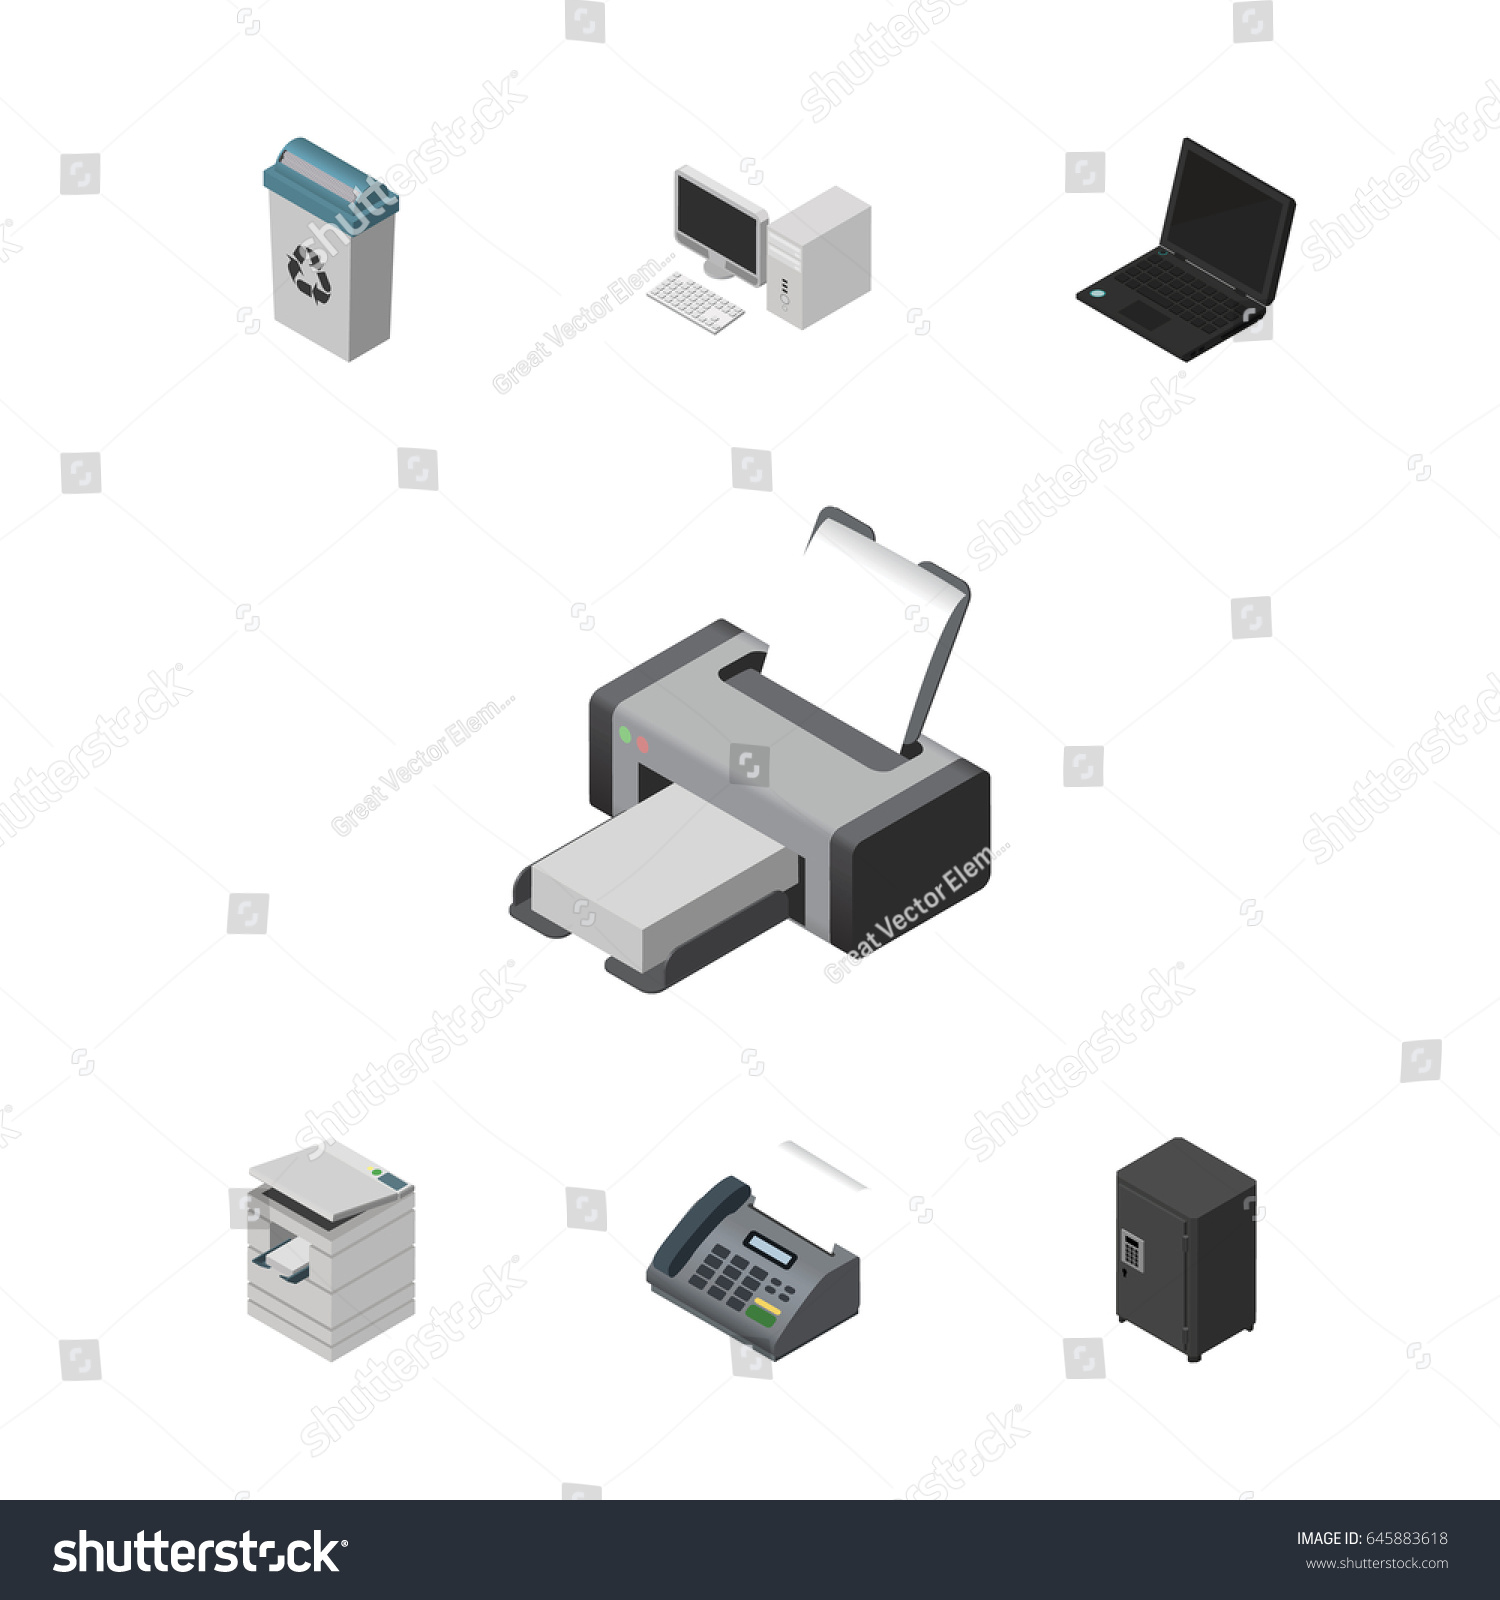 Isometric Cabinet Set Strongbox Computer Garbage Stock Vector